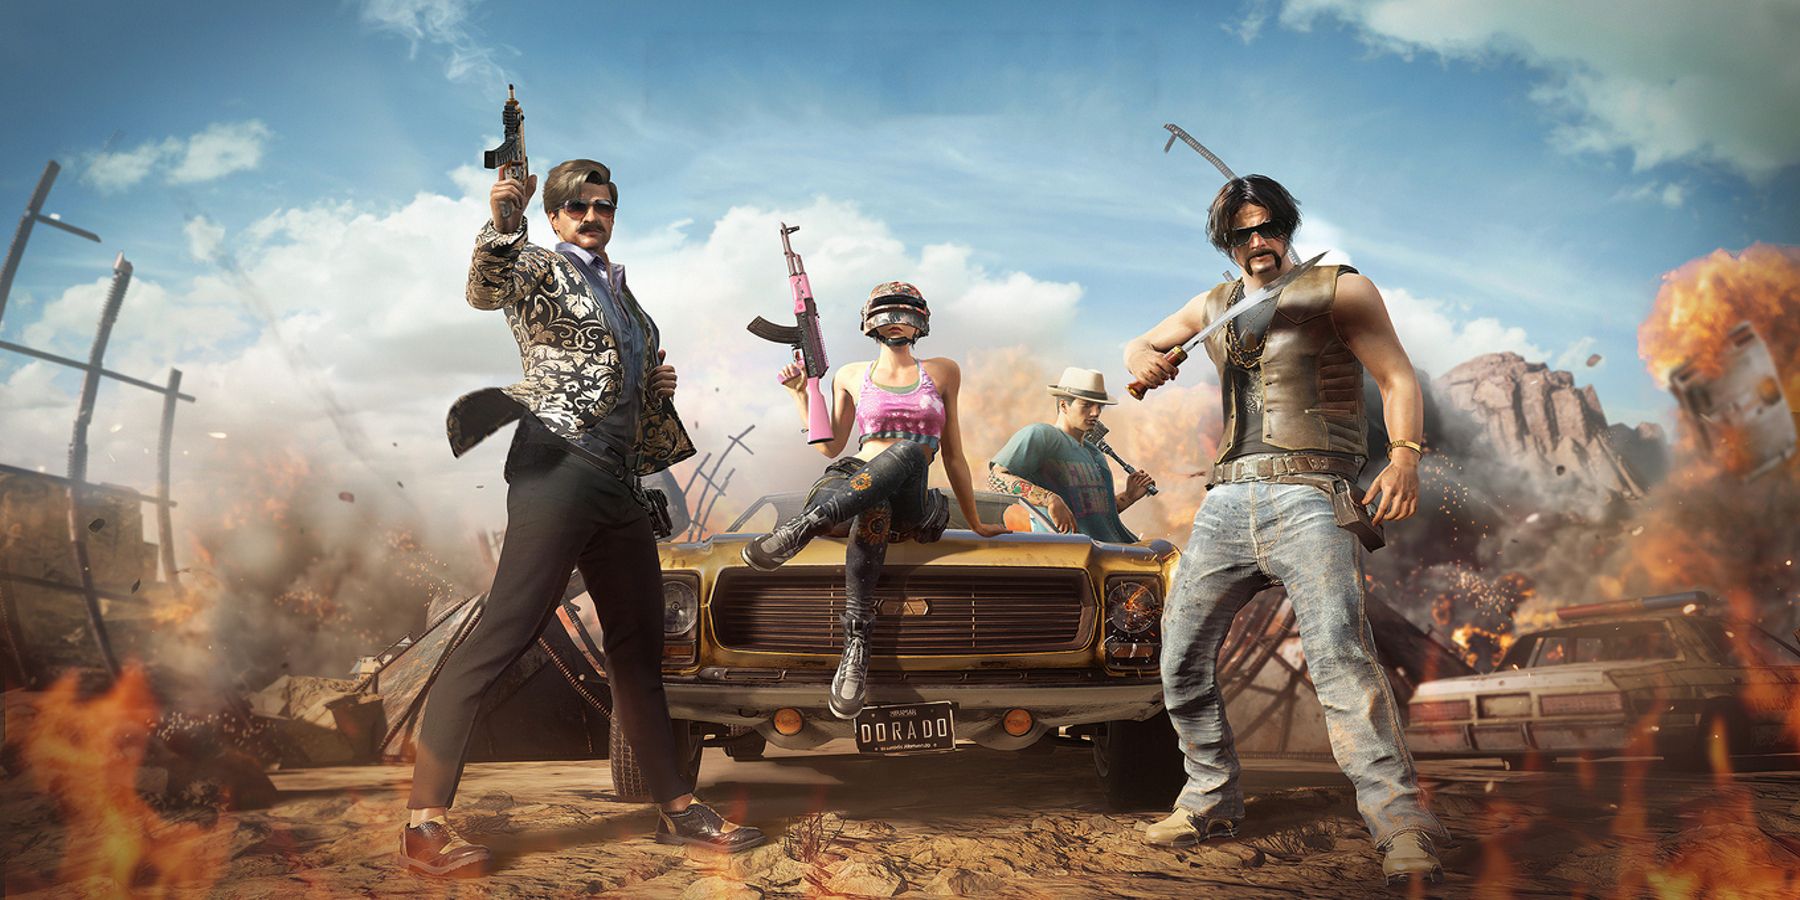 Promotional artwork from the battle royale game PlayerUnknown's Battlegrounds.